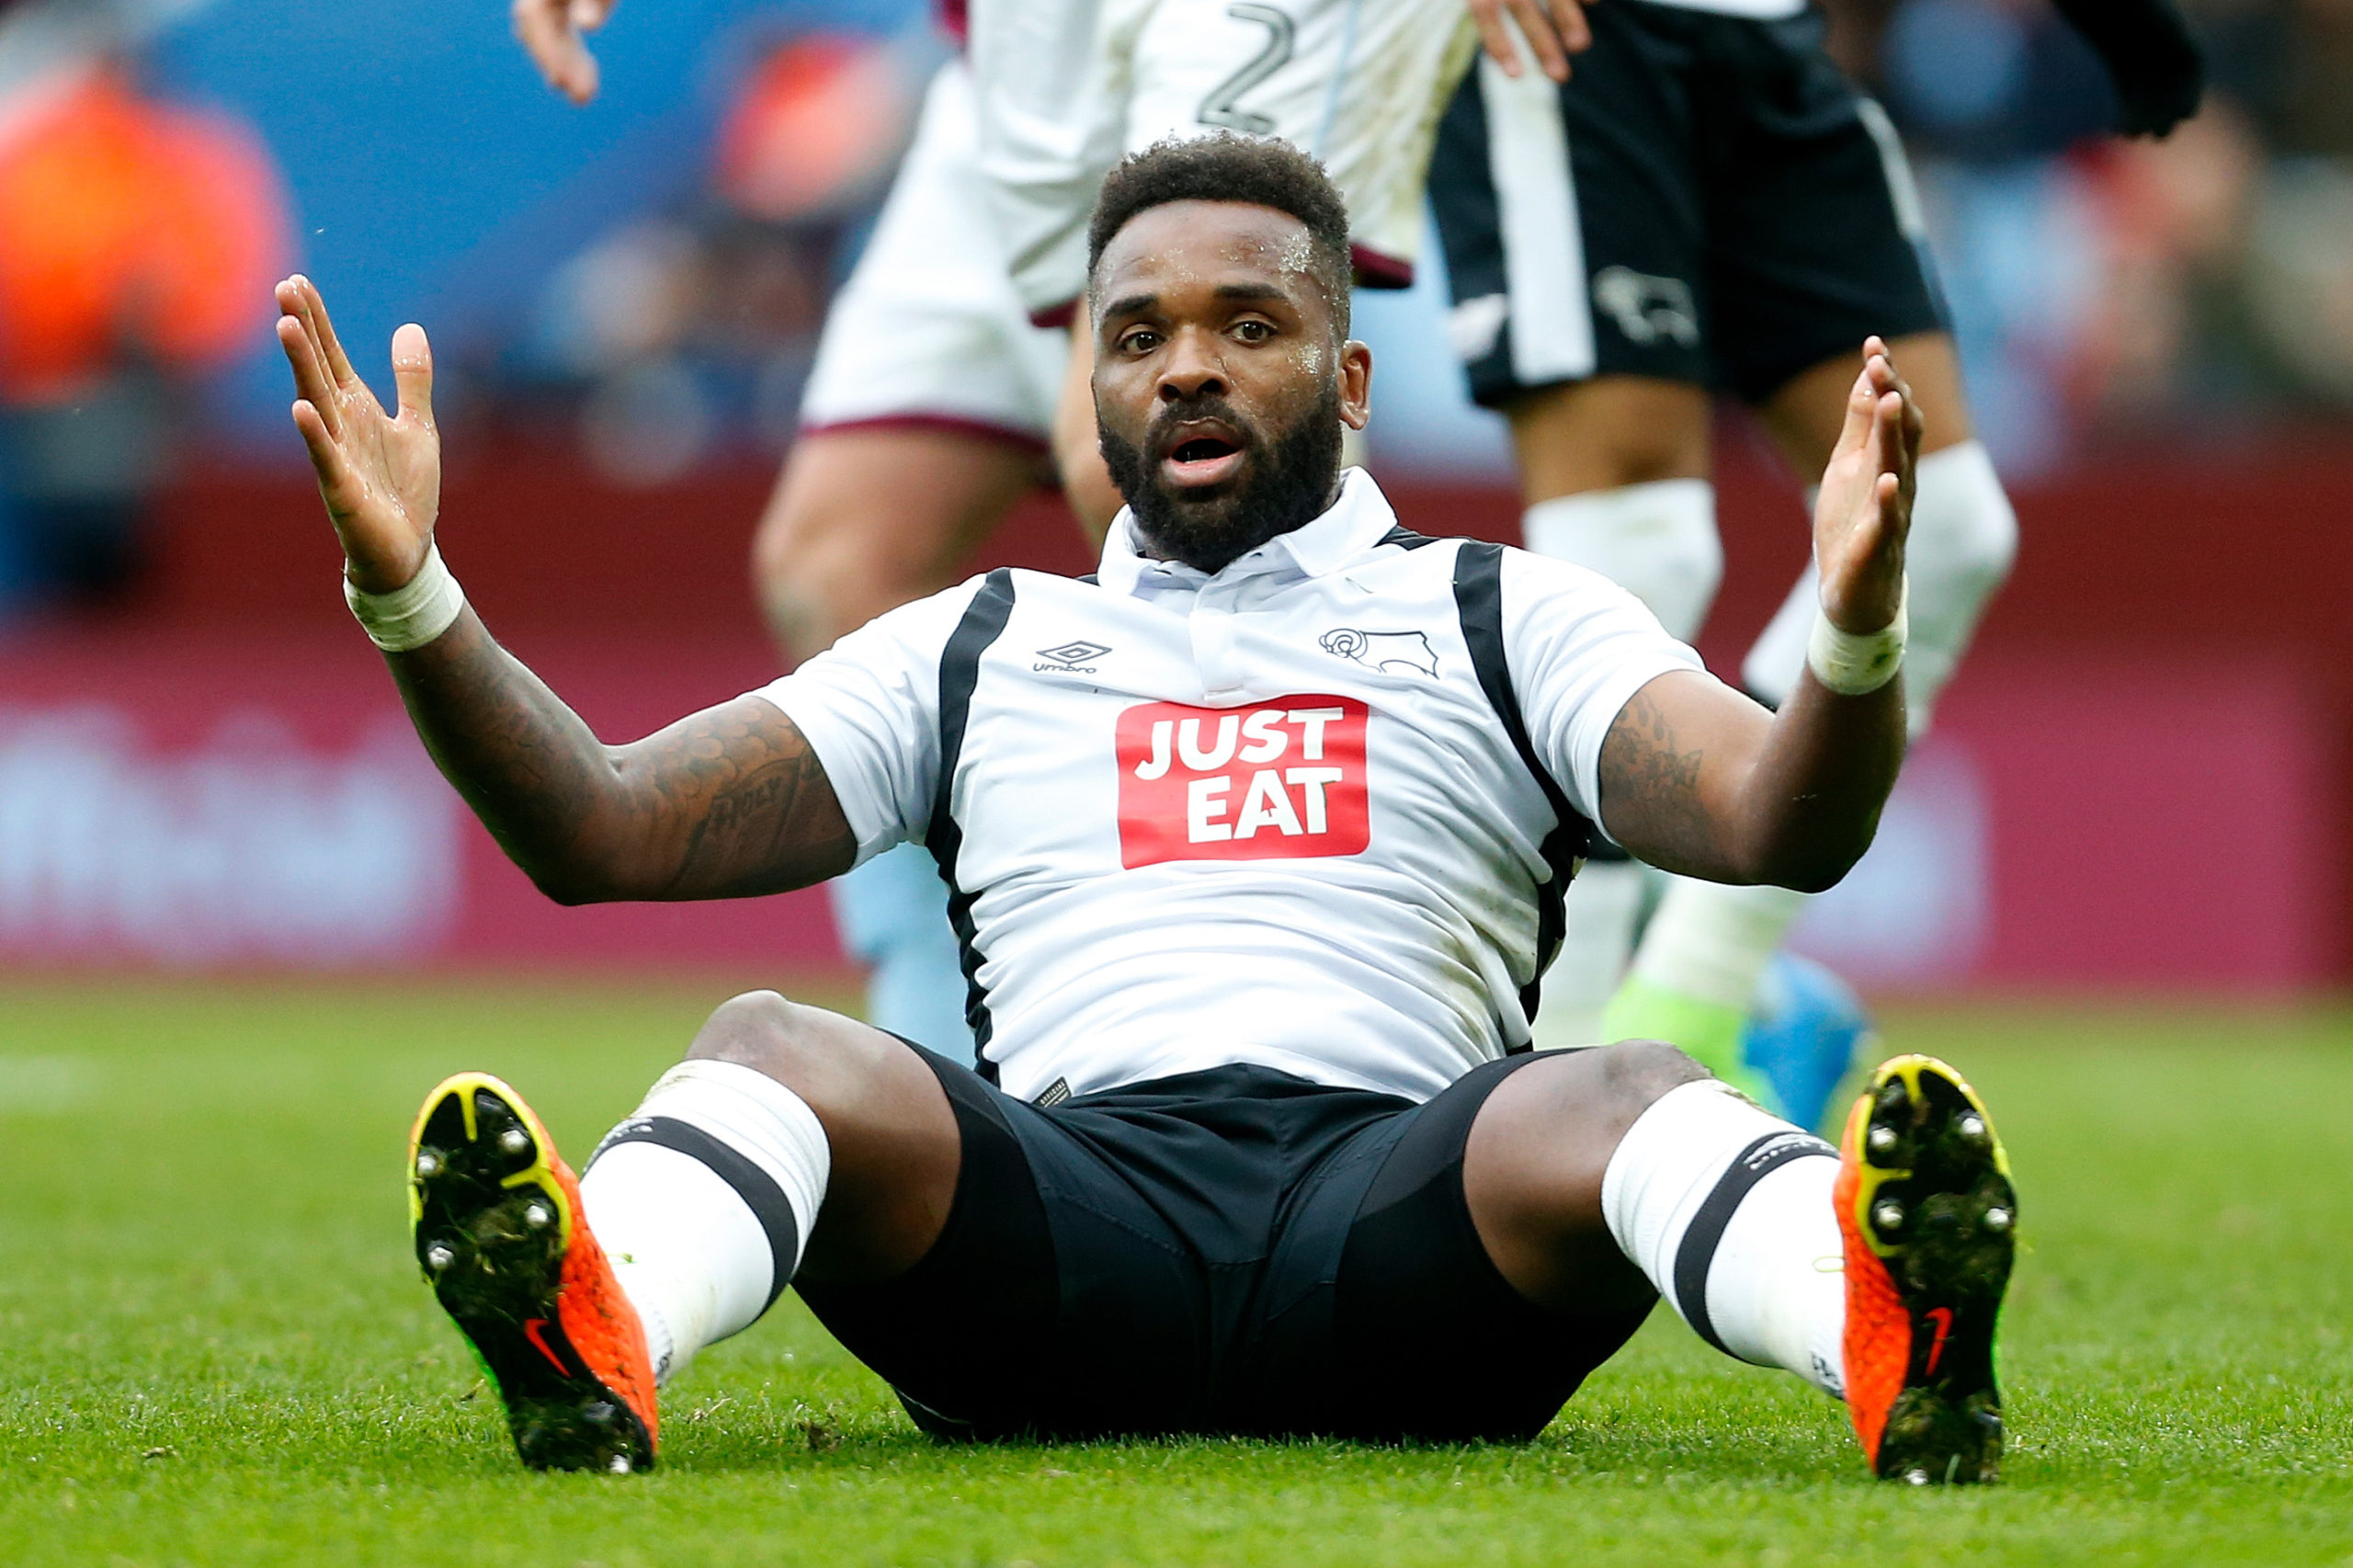 'I understand it': Darren Bent predicts 28-year-old will never play for Chelsea again, but will still want to stay